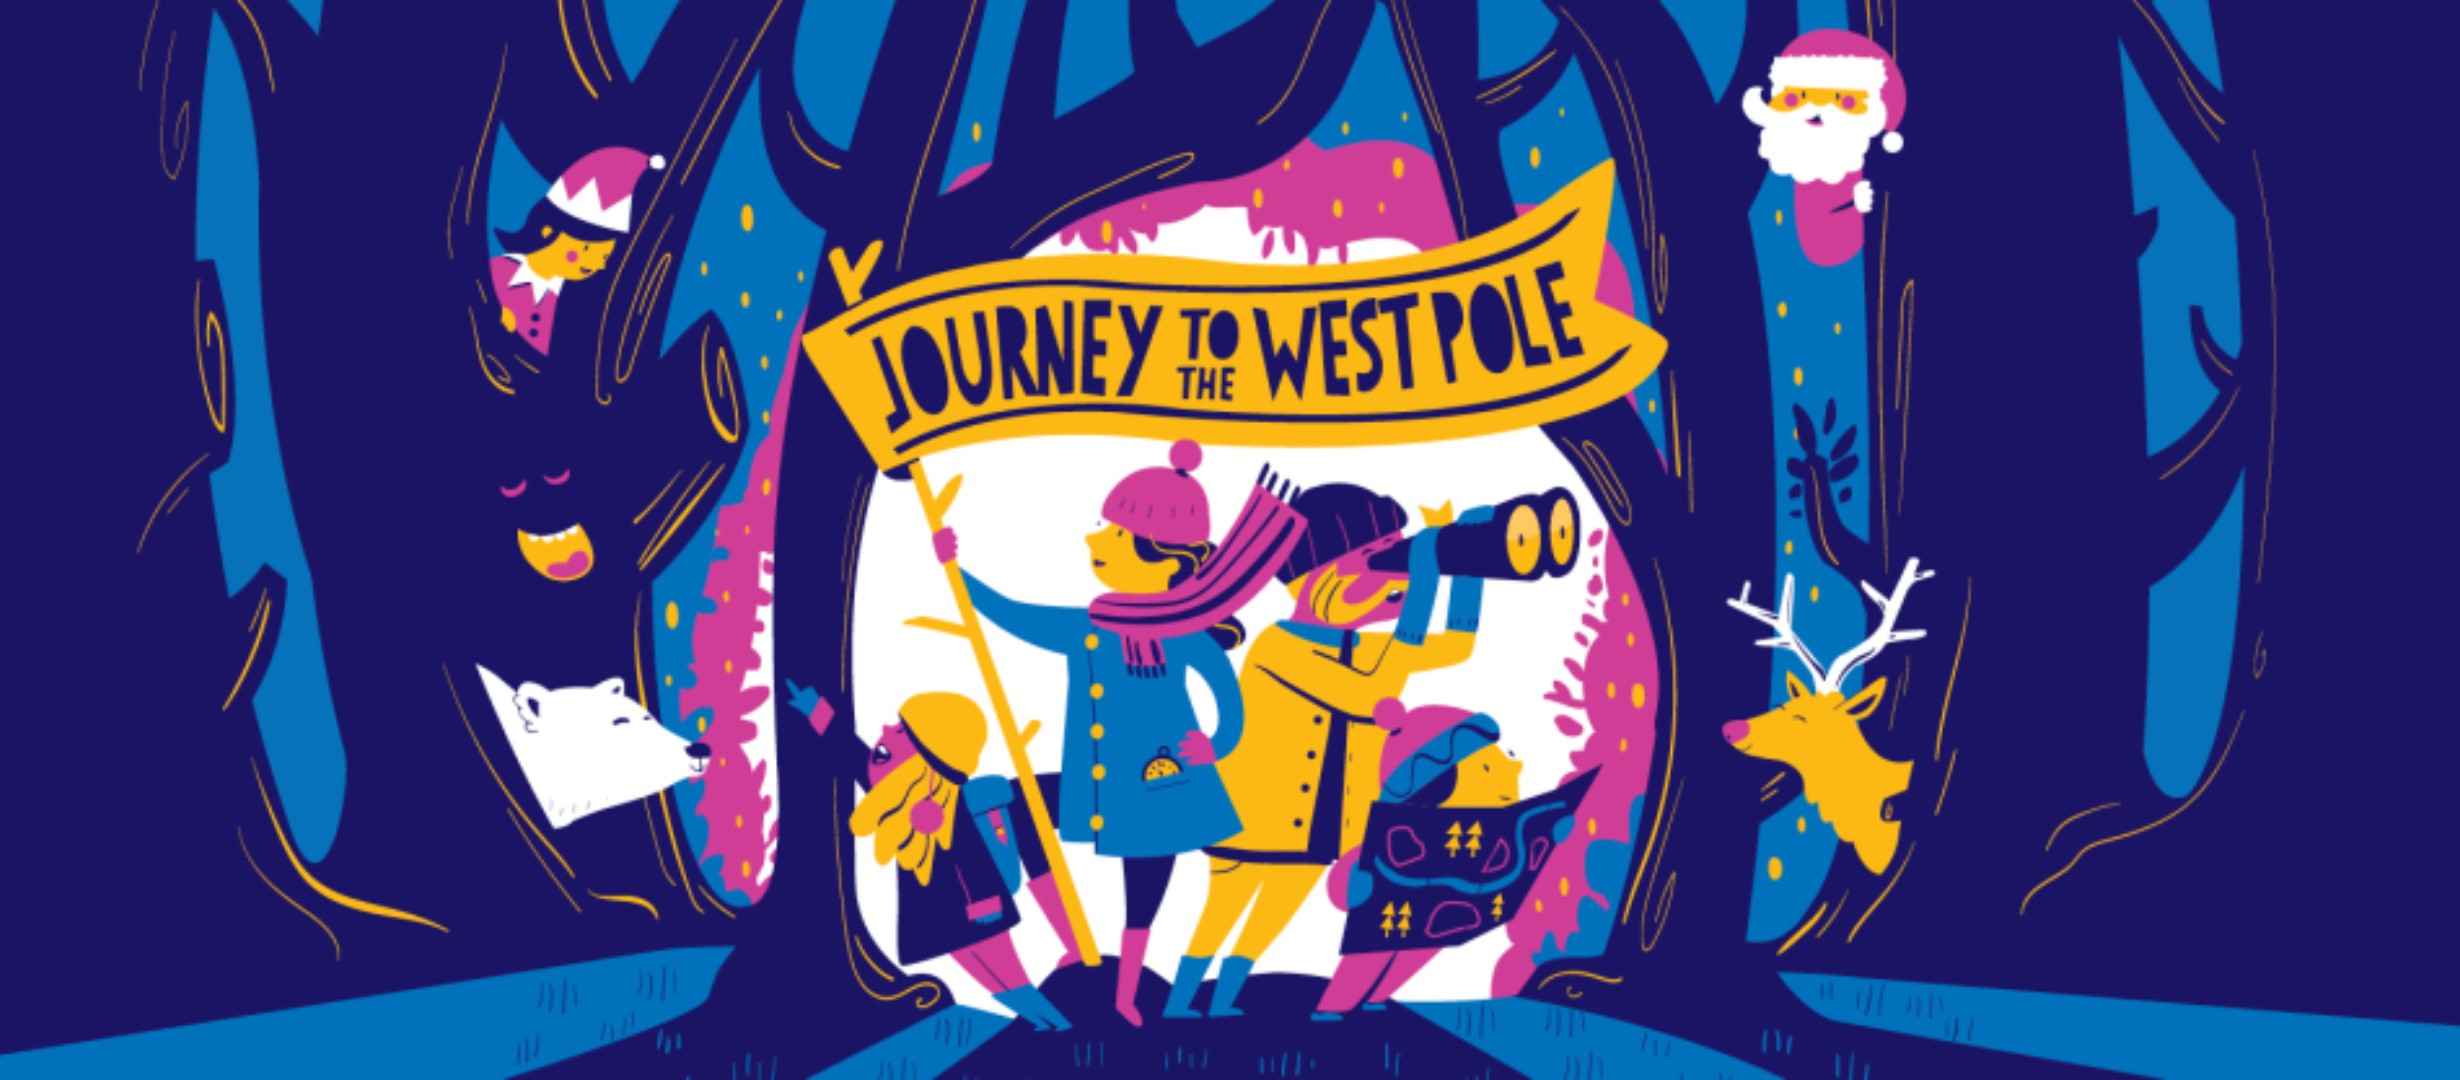 text reads 'Journey to the west pole'. cartoon image of a family exploring